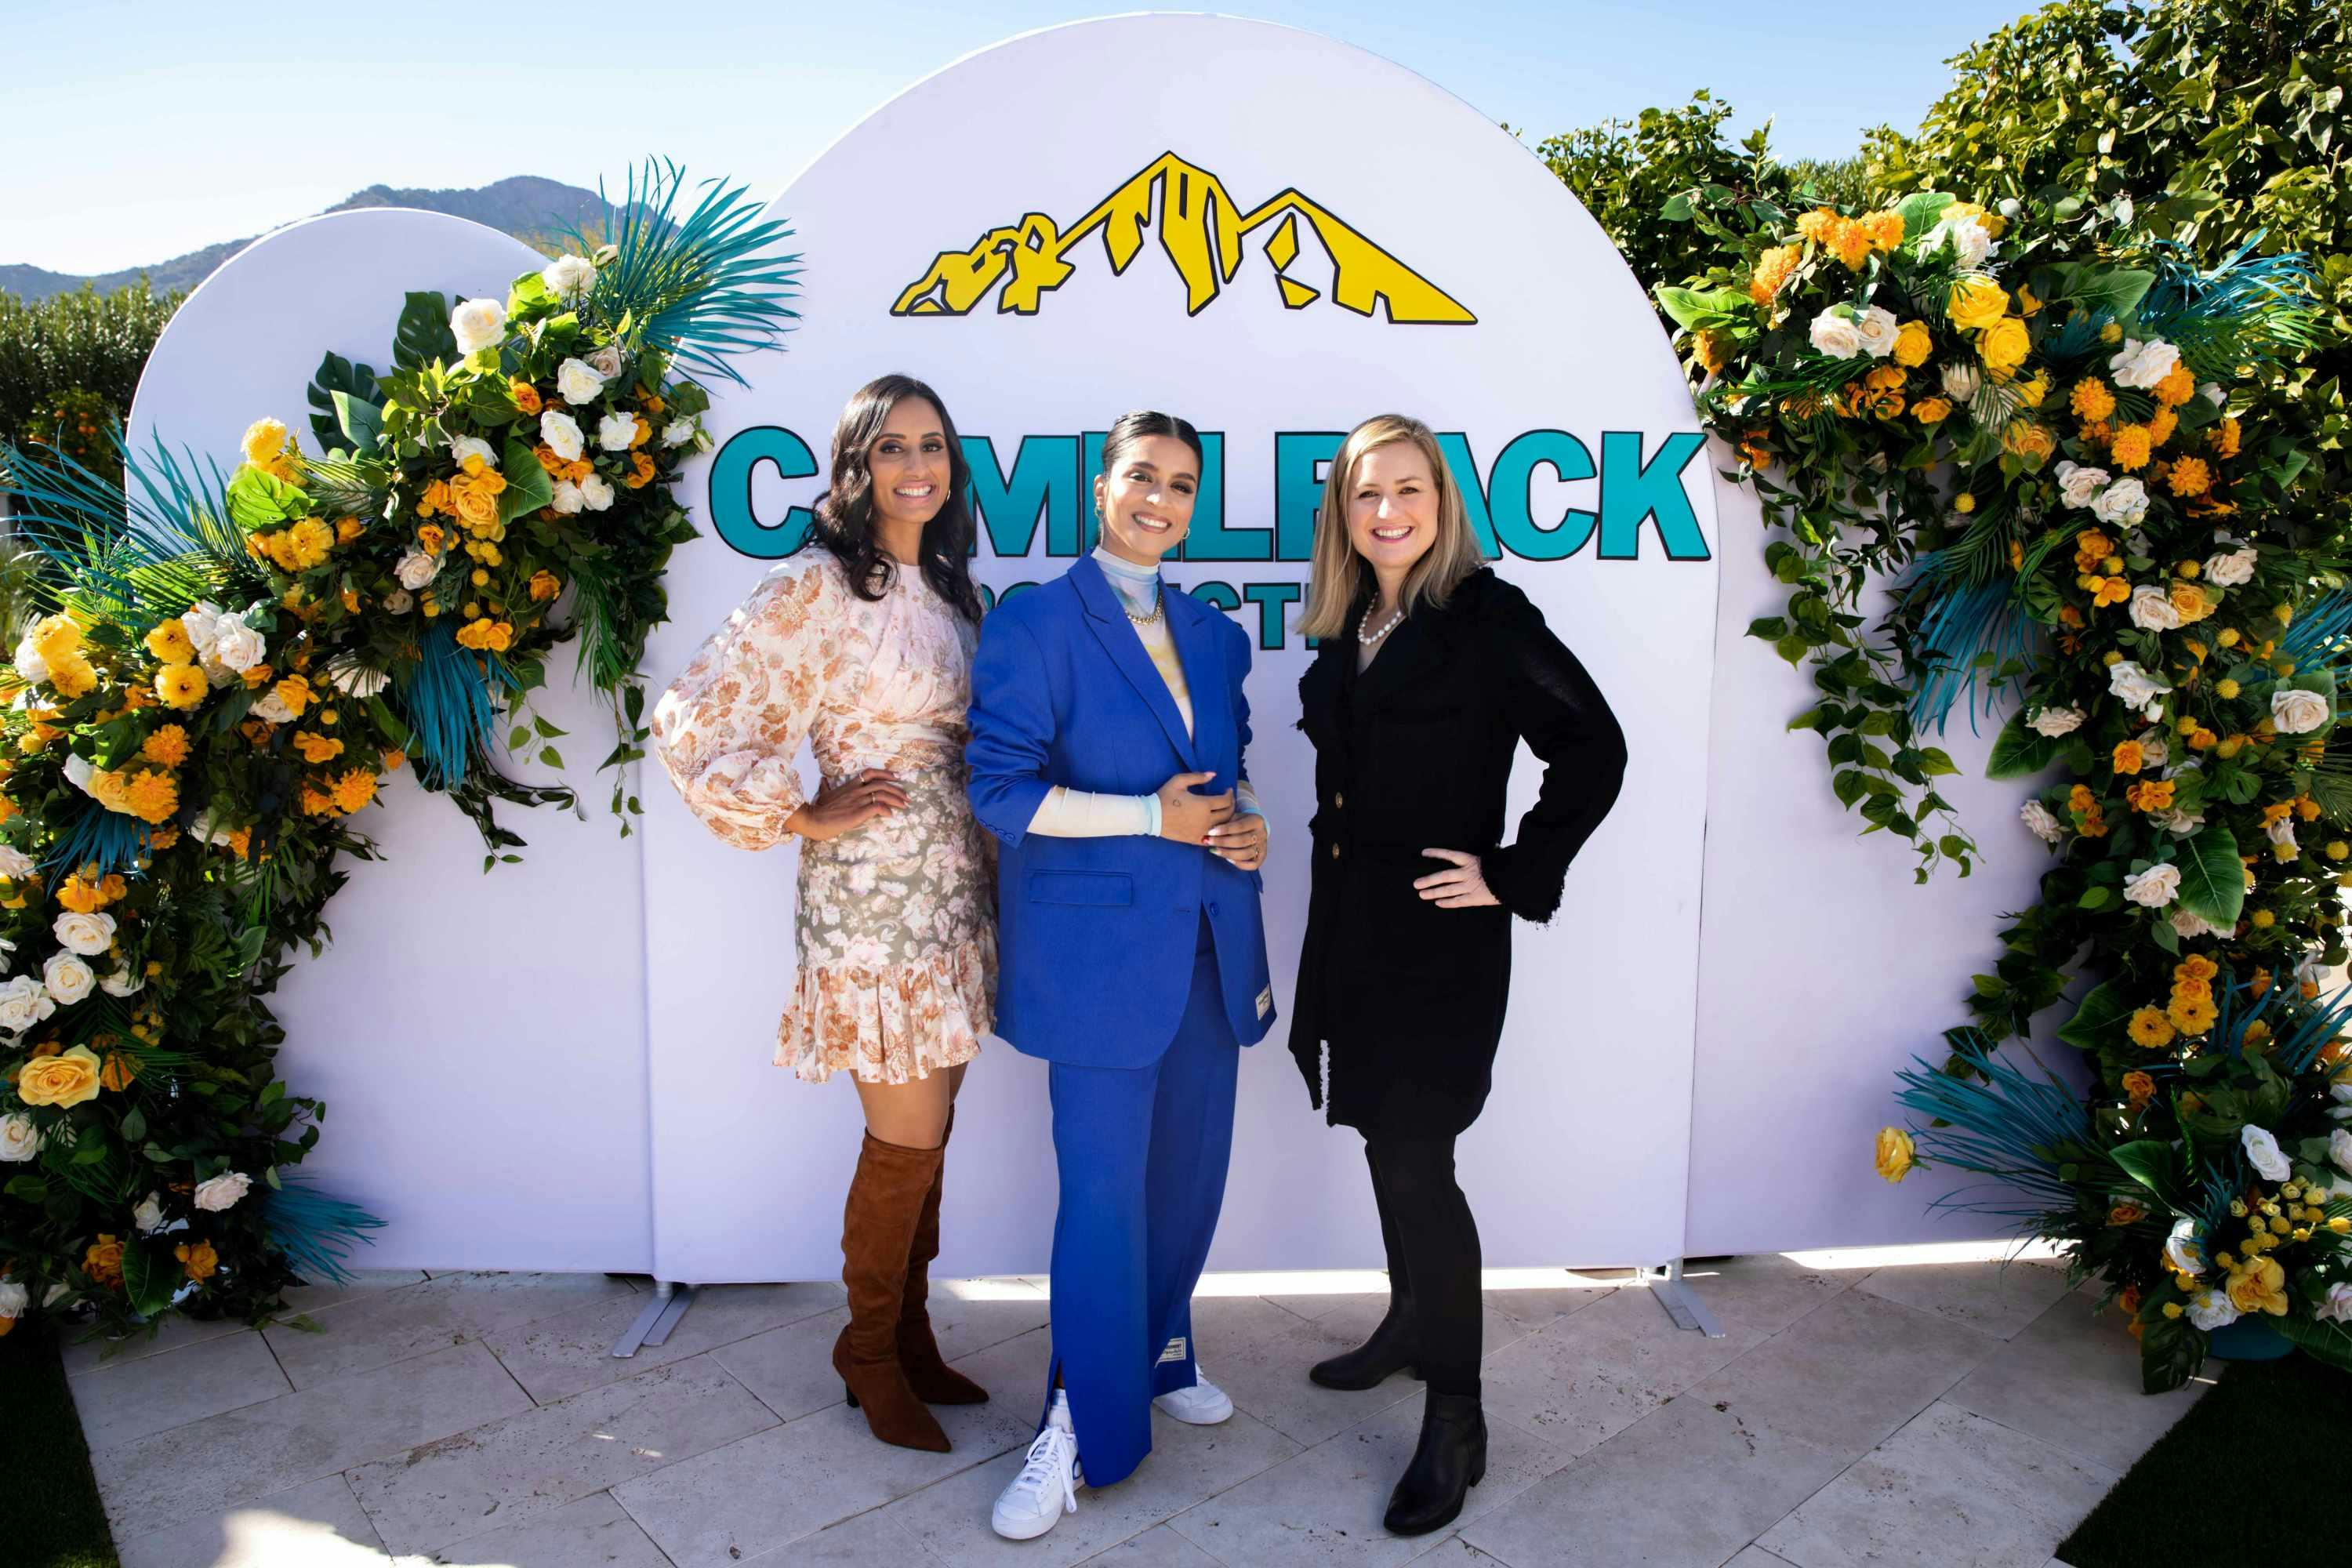 From left to right: Anita Verma-Lallian, Lilly Singh, Mayor Phoenix Mayor Kate Gallego (Camelback Ventures)